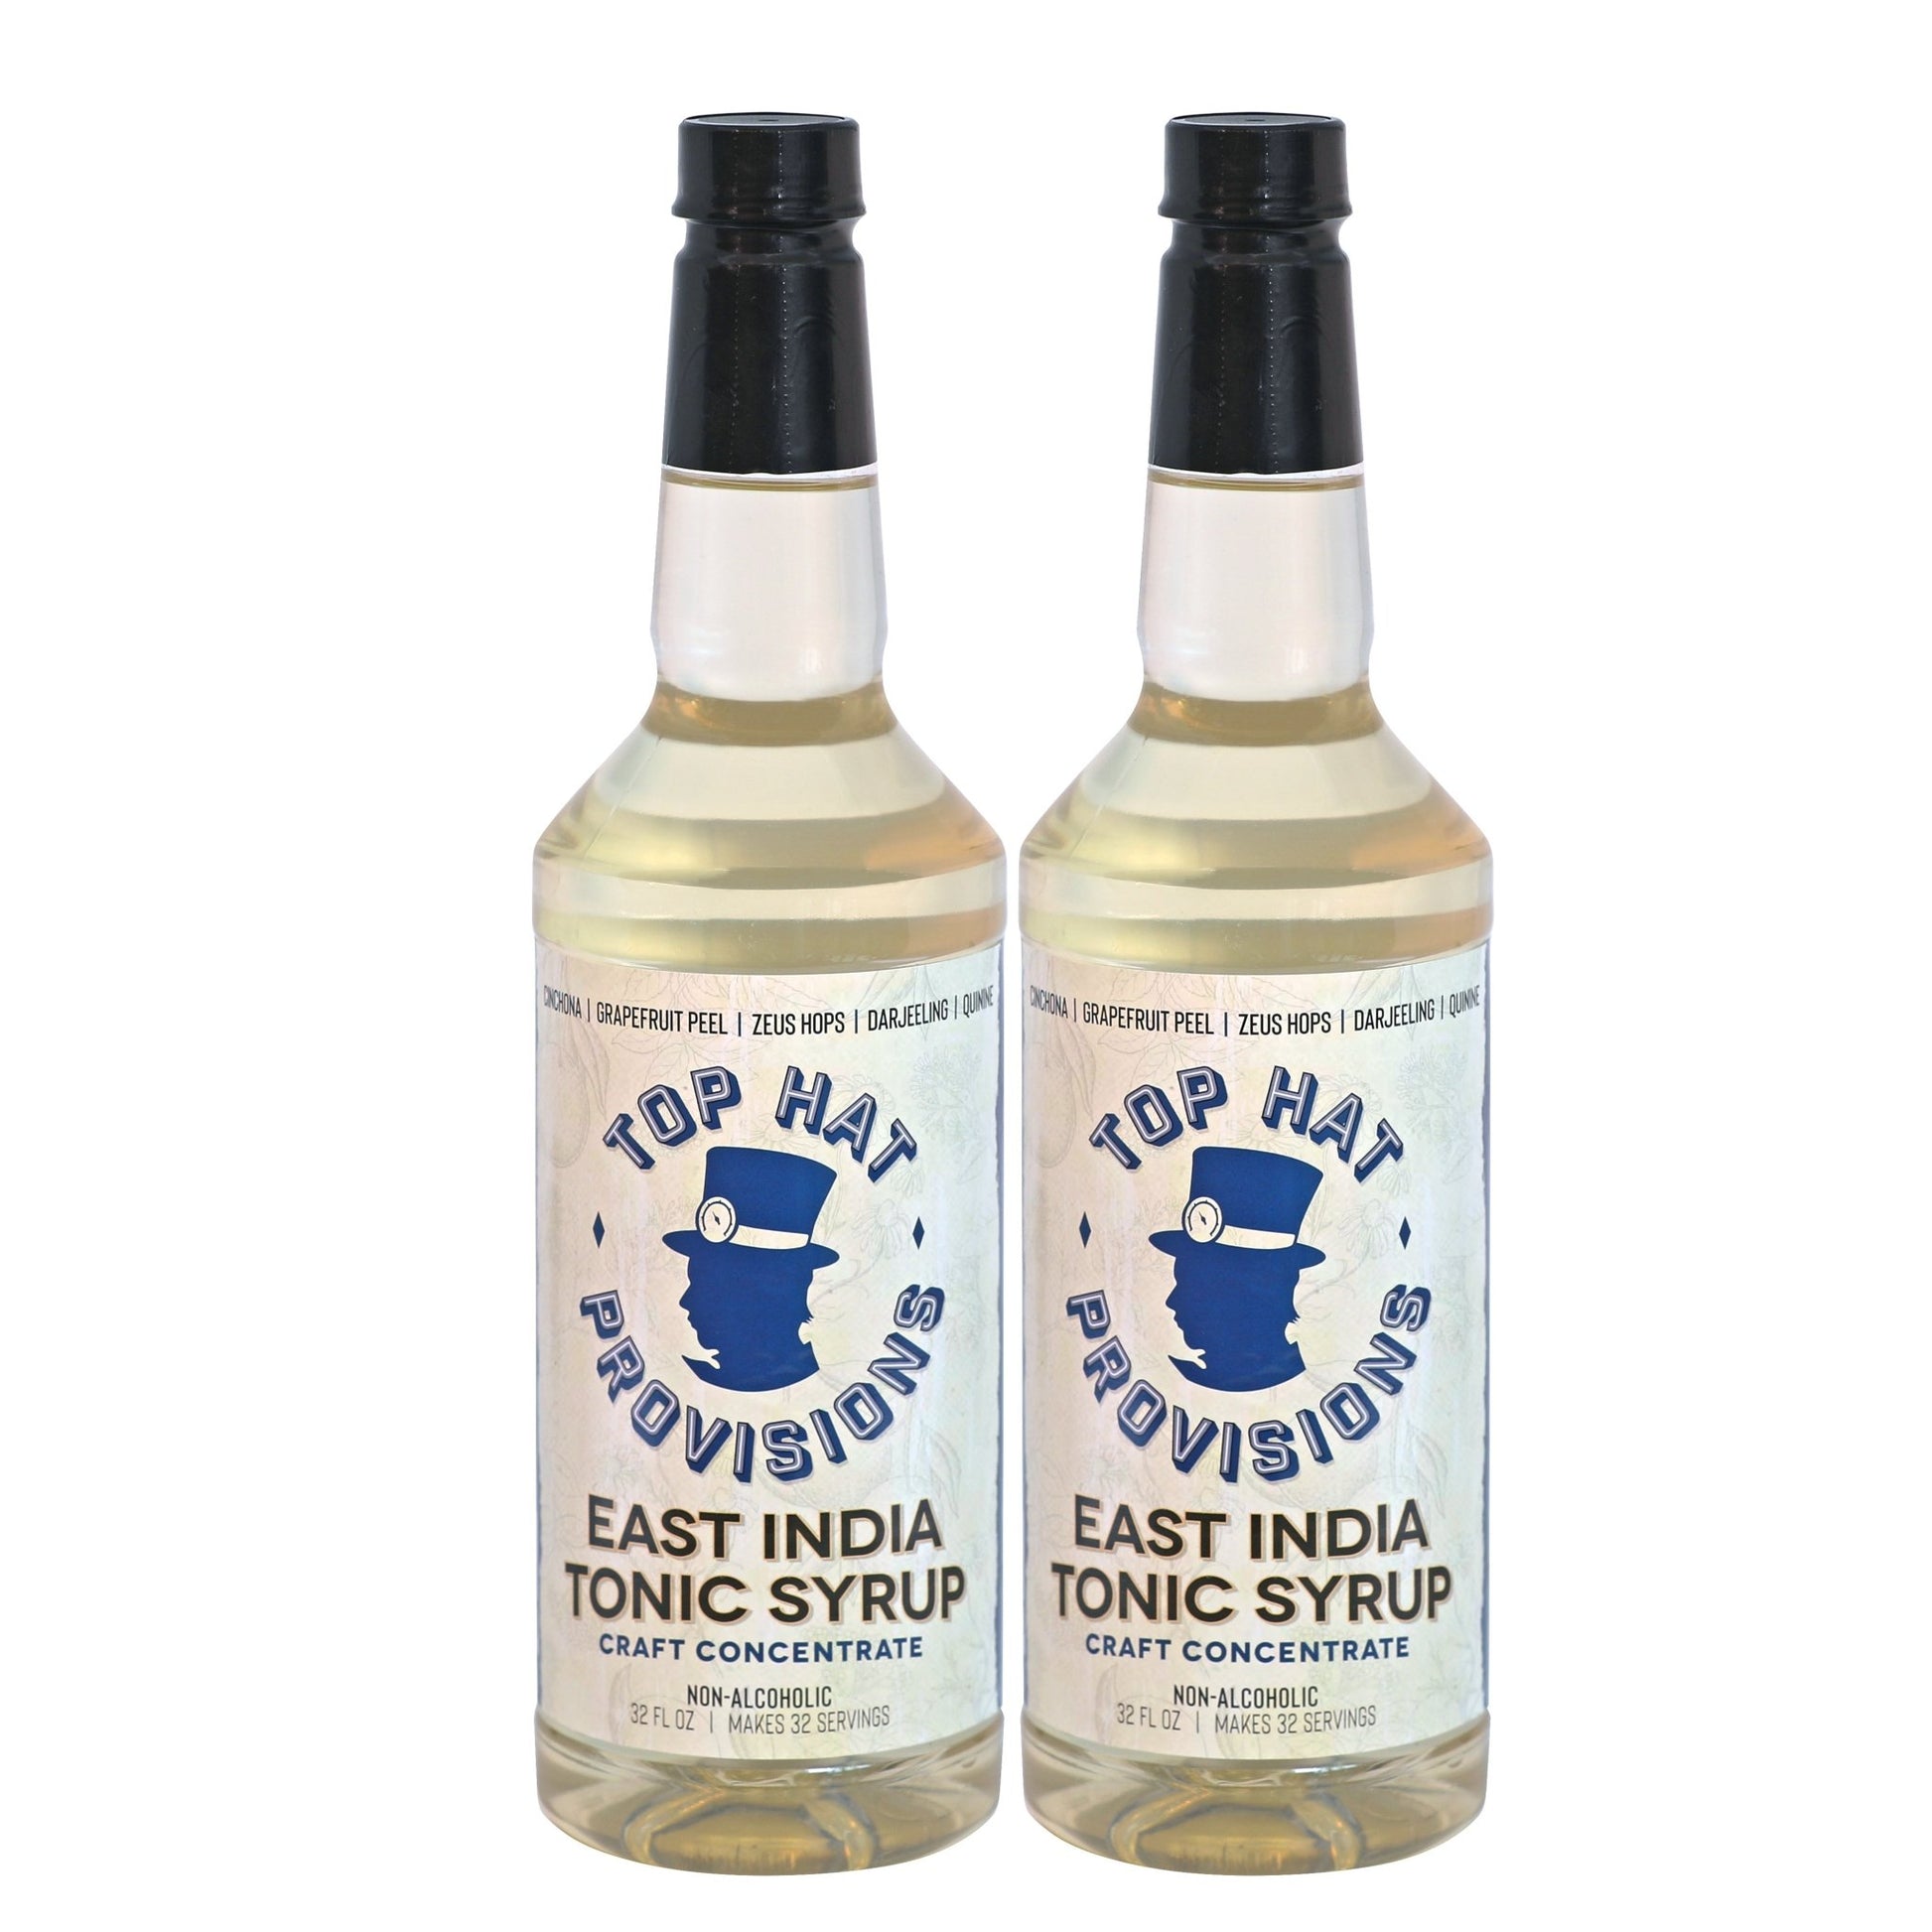 Top Hat East India Tonic Syrup & 5x Quinine Concentrate - 2 pack of 32oz bottles - Groove Rabbit